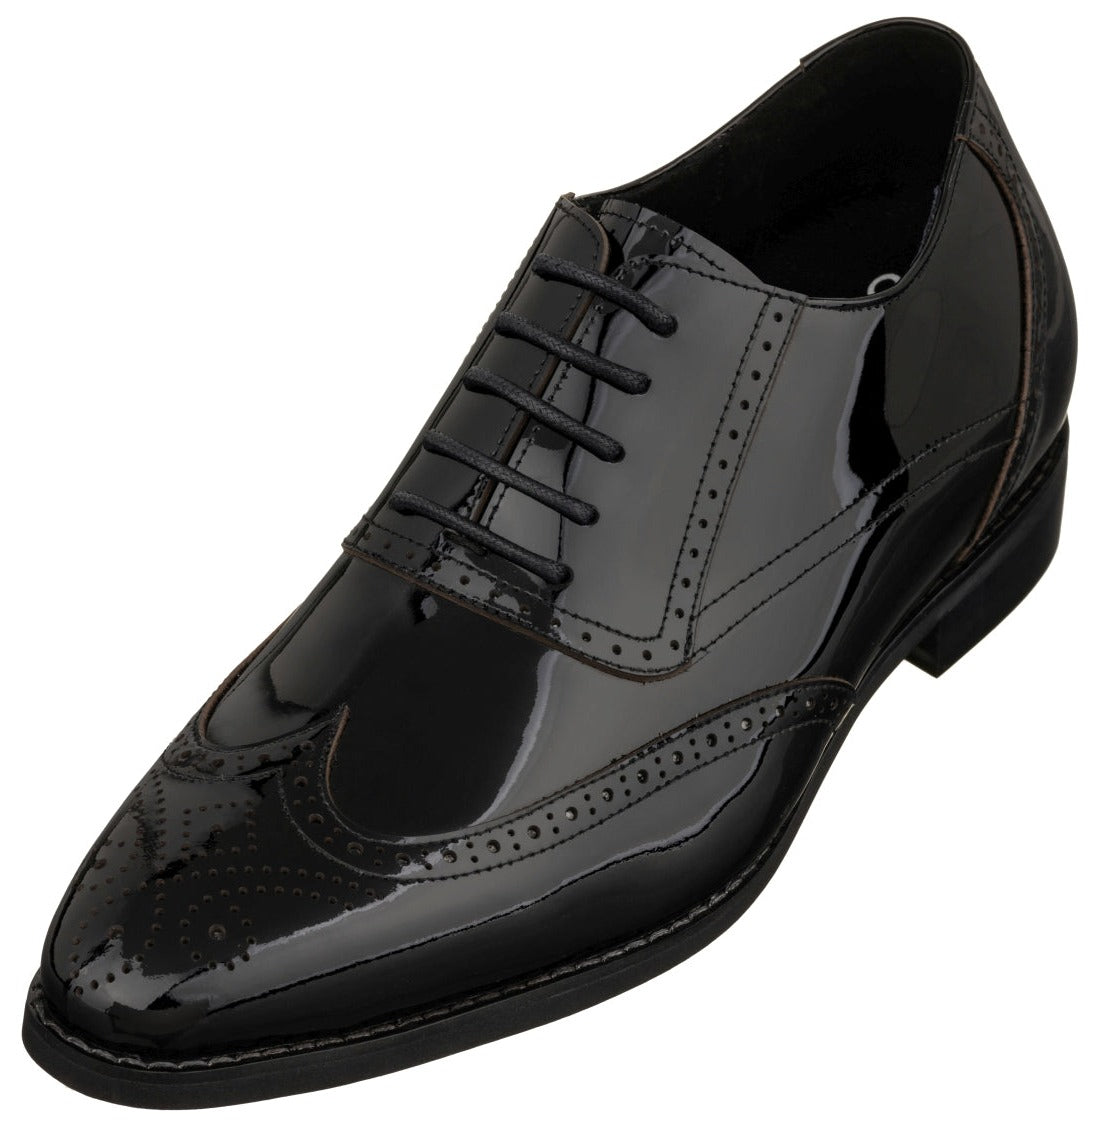 Elevator shoes height increase CALTO - S1015 - 3.0 Inches Taller (Black) - Patent Leather Dress Oxford